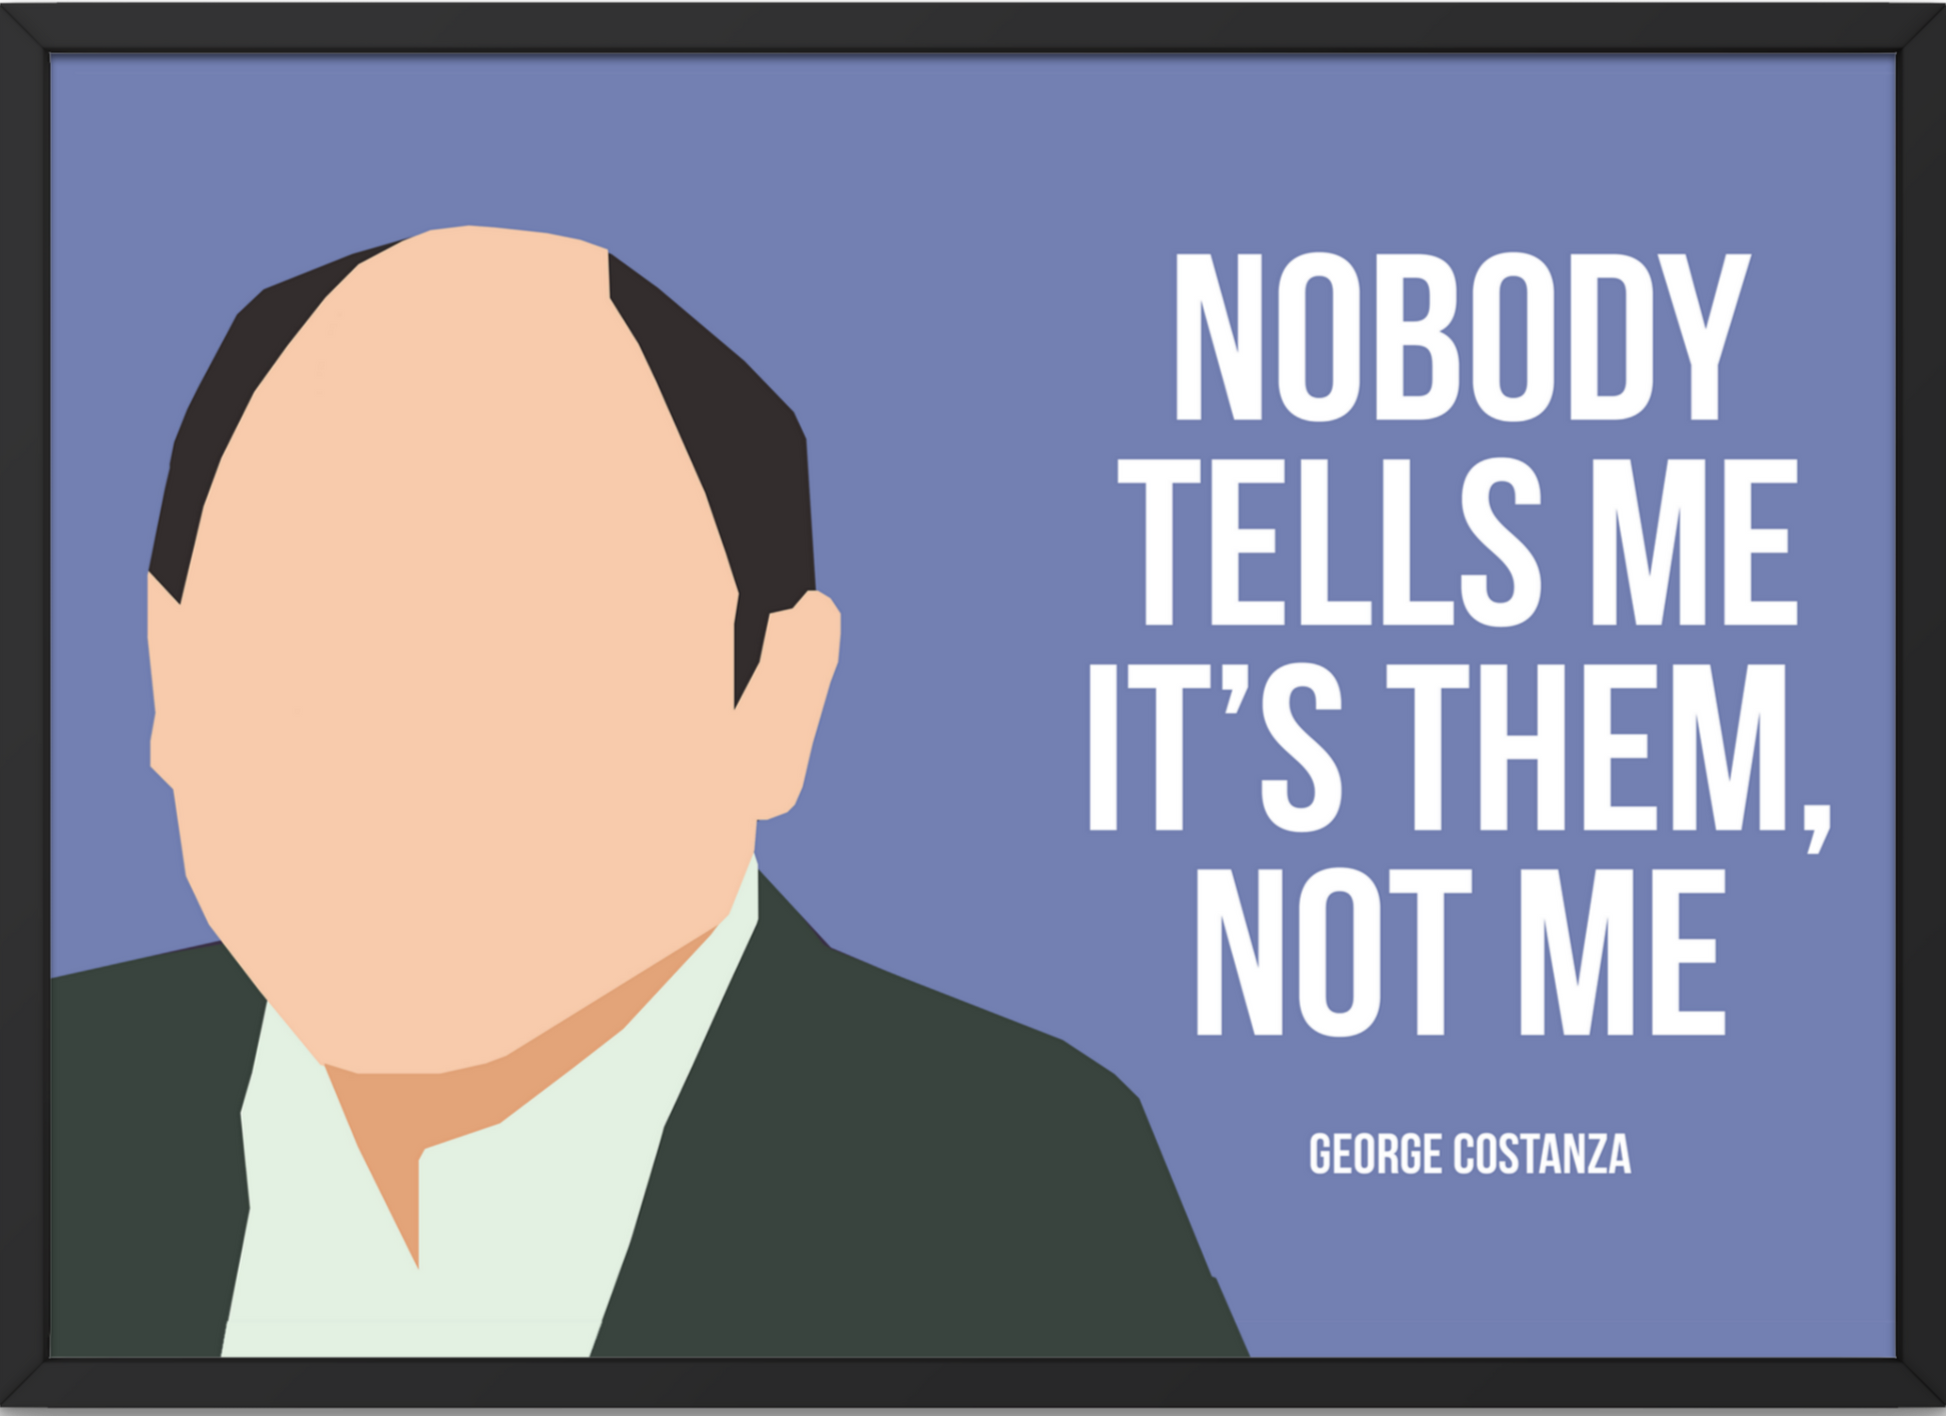 Seinfeld Quotes | George Costanza Quotes | Jerry Seinfeld | Funny TV Show  Quotes | Classic TV Shows | 90s Television | Seinfeld Prints